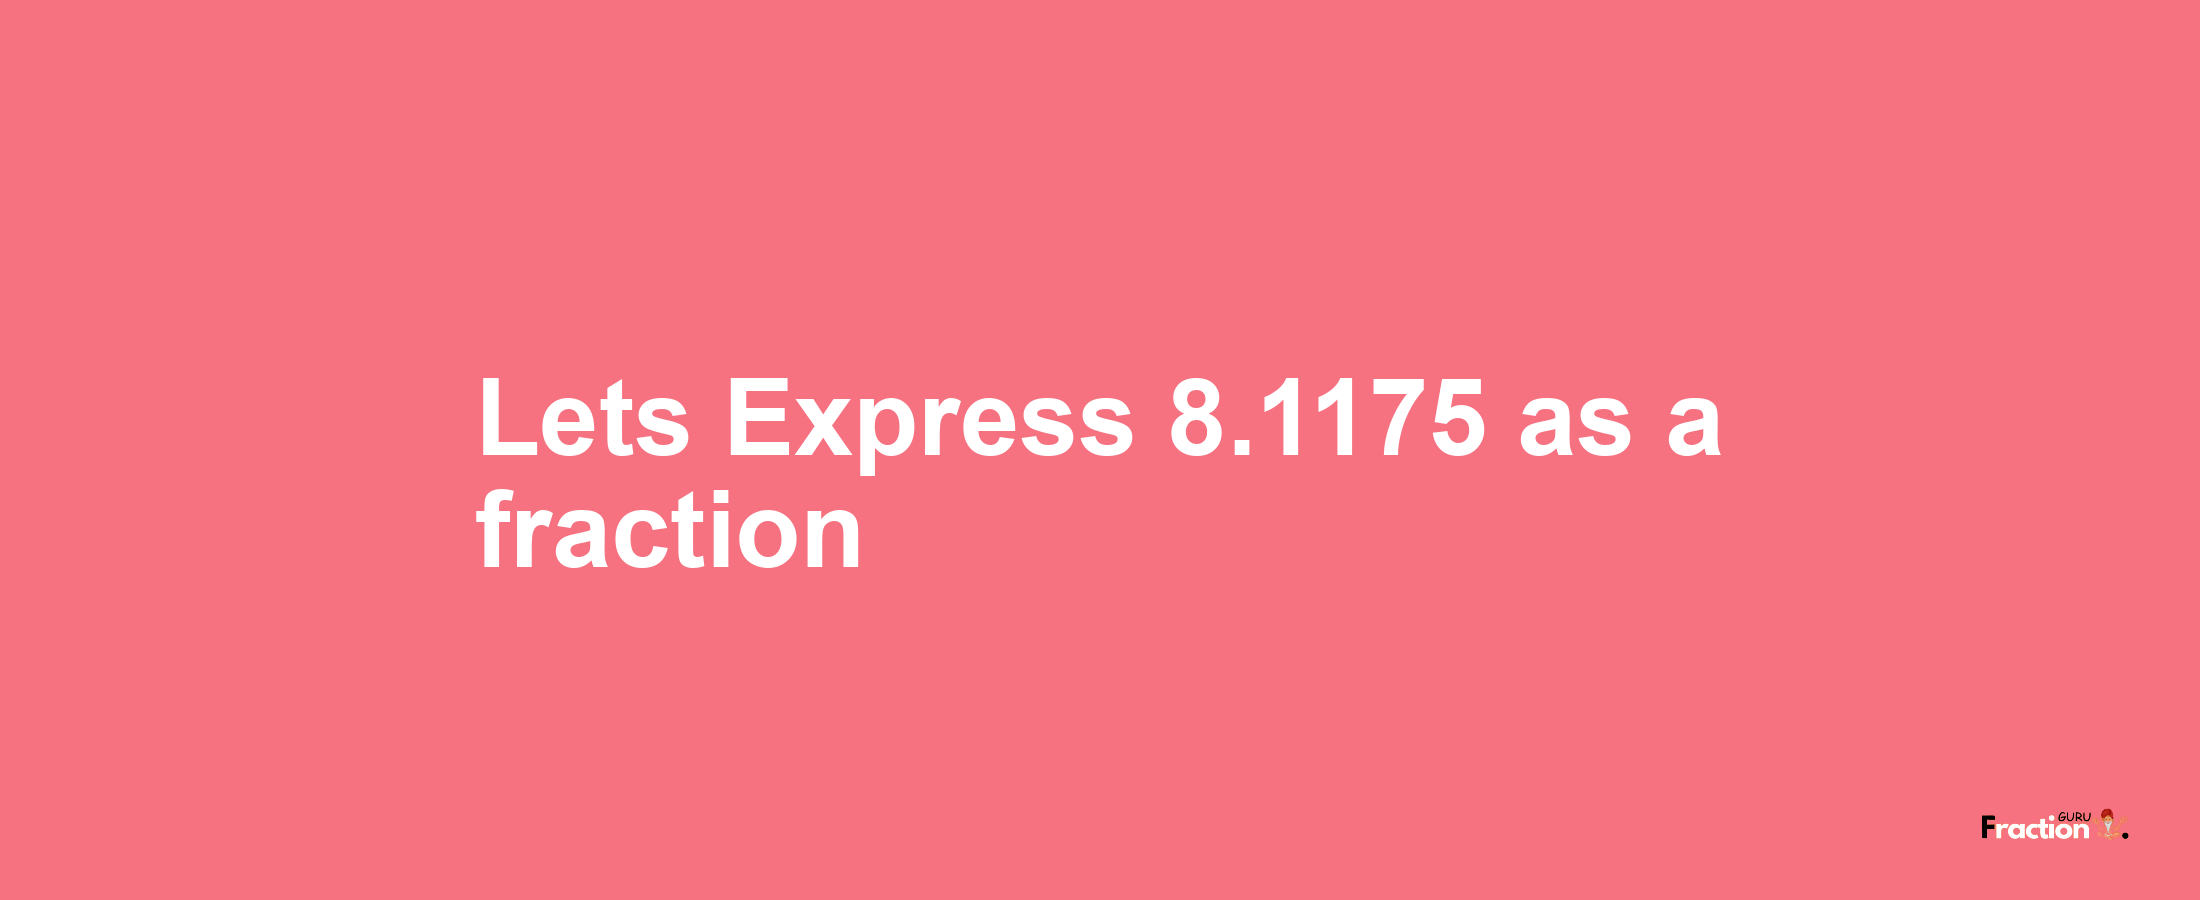 Lets Express 8.1175 as afraction